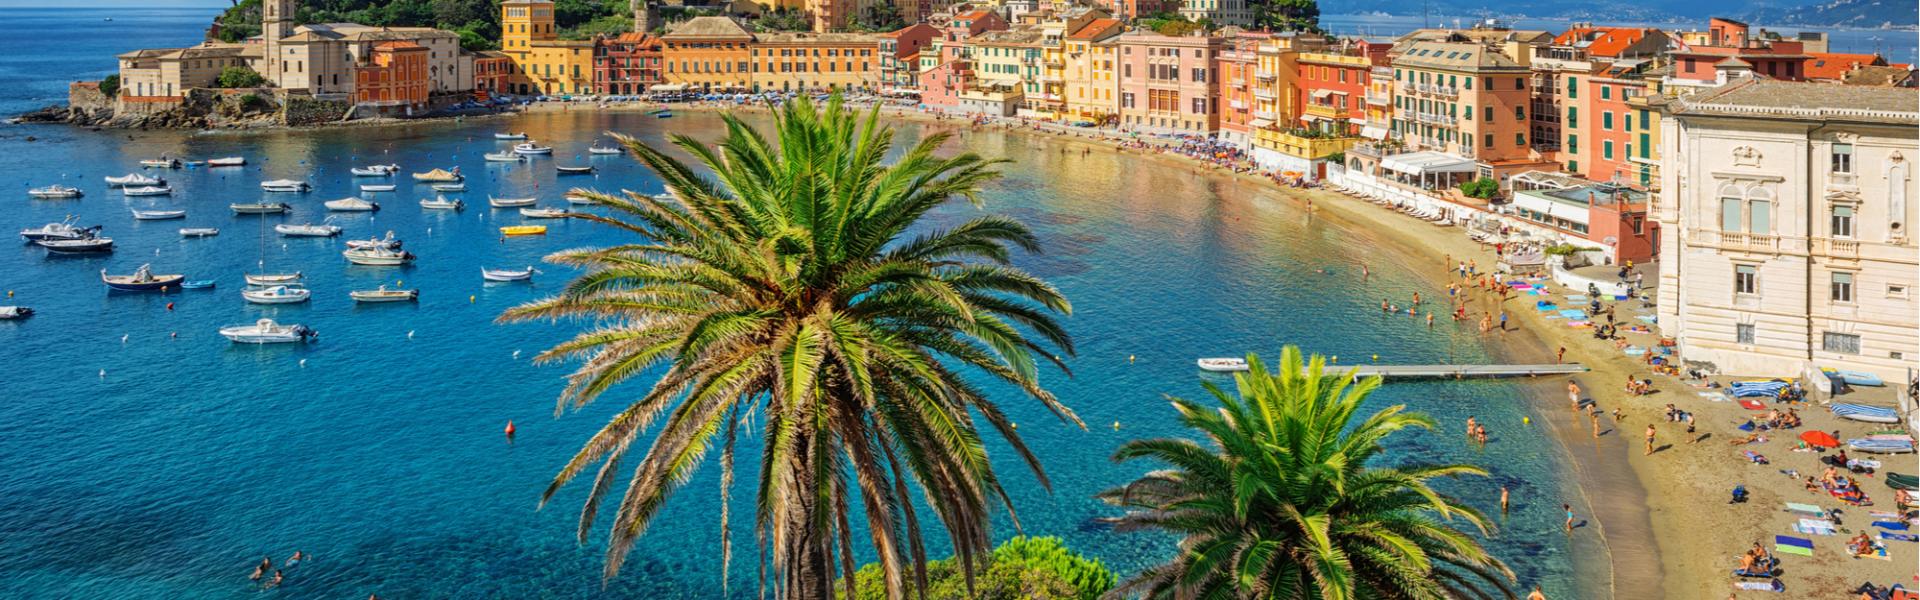 Find the ideal holiday home in Sestri Levante for your Italian adventure - Casamundo